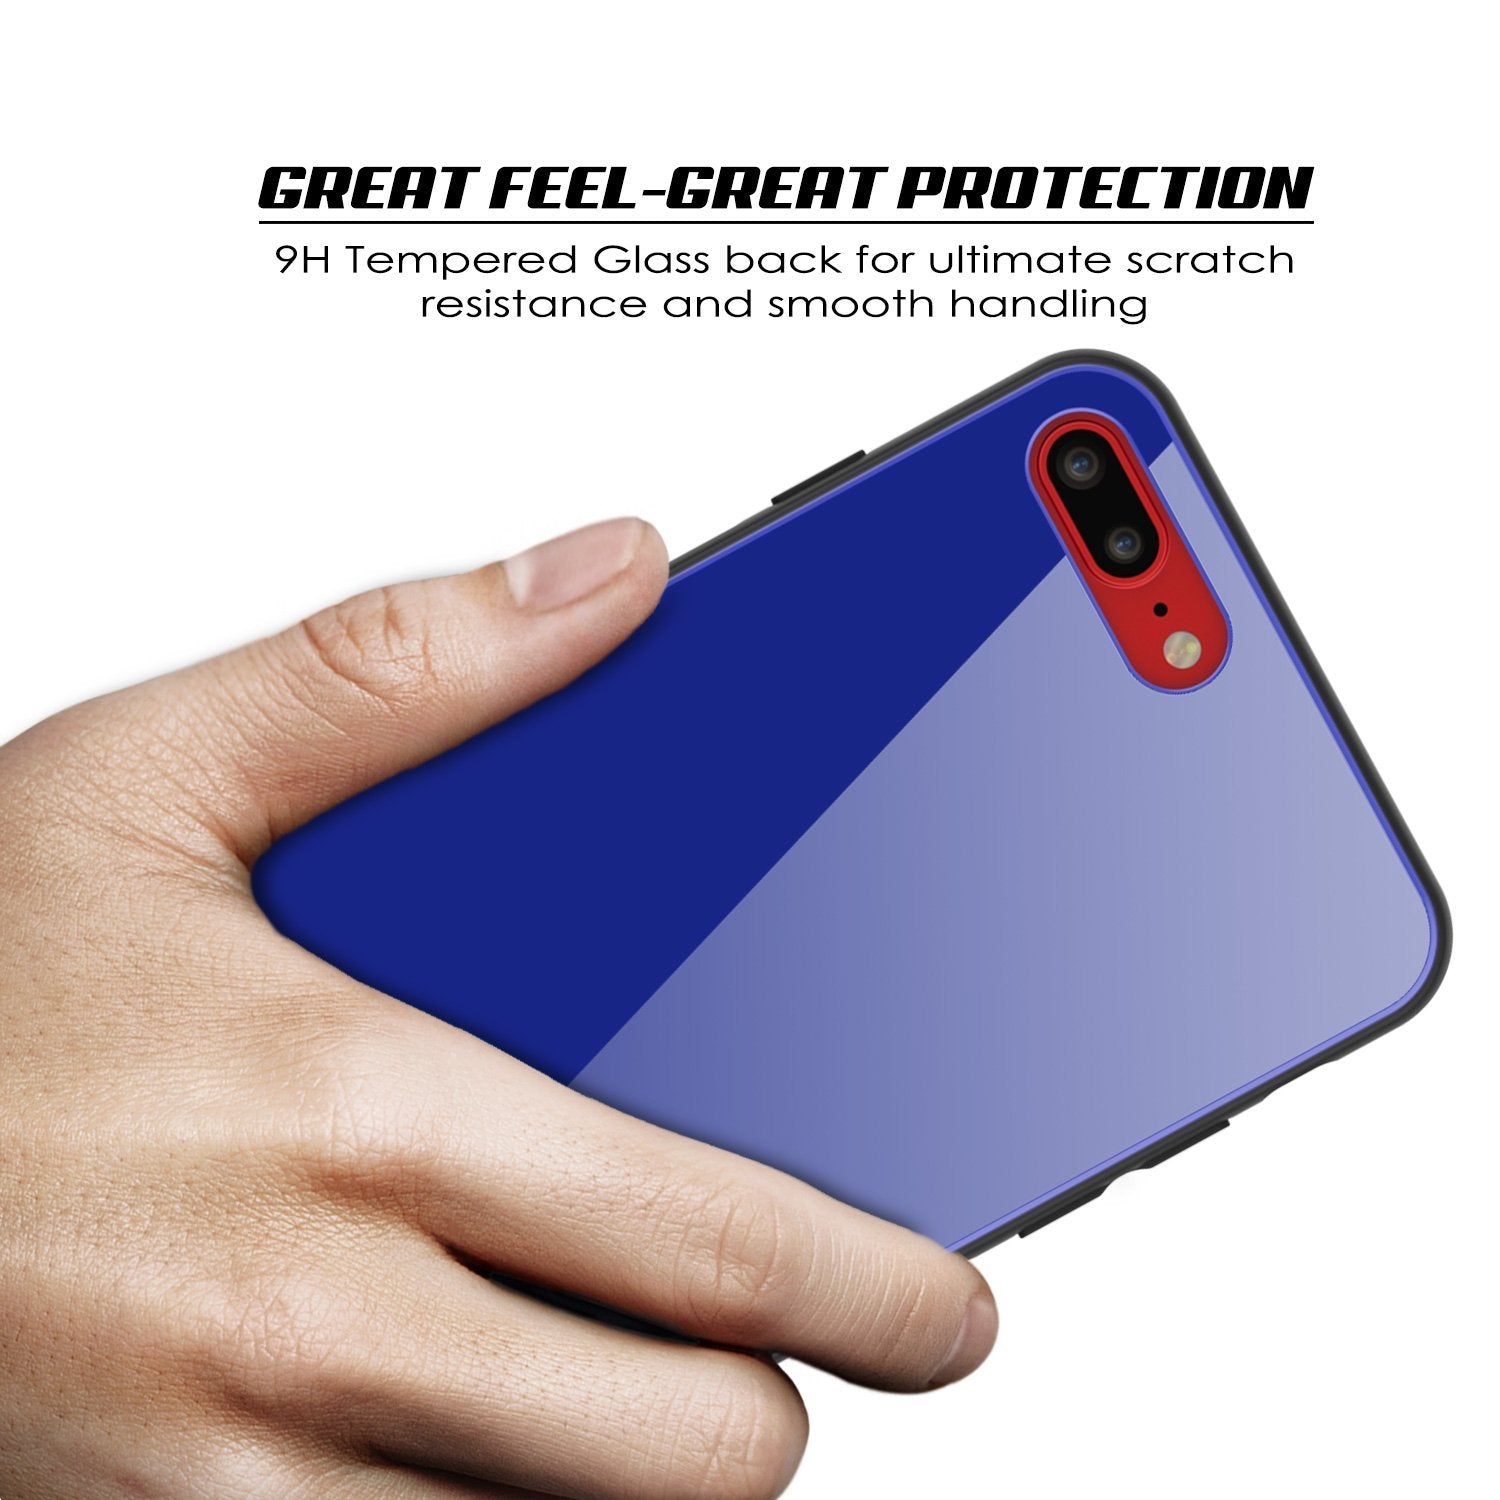 iPhone 8 PLUS Case, Punkcase GlassShield Ultra Thin Protective 9H Full Body Tempered Glass Cover W/ Drop Protection & Non Slip Grip for Apple iPhone 7 PLUS / Apple iPhone 8 PLUS (Blue)